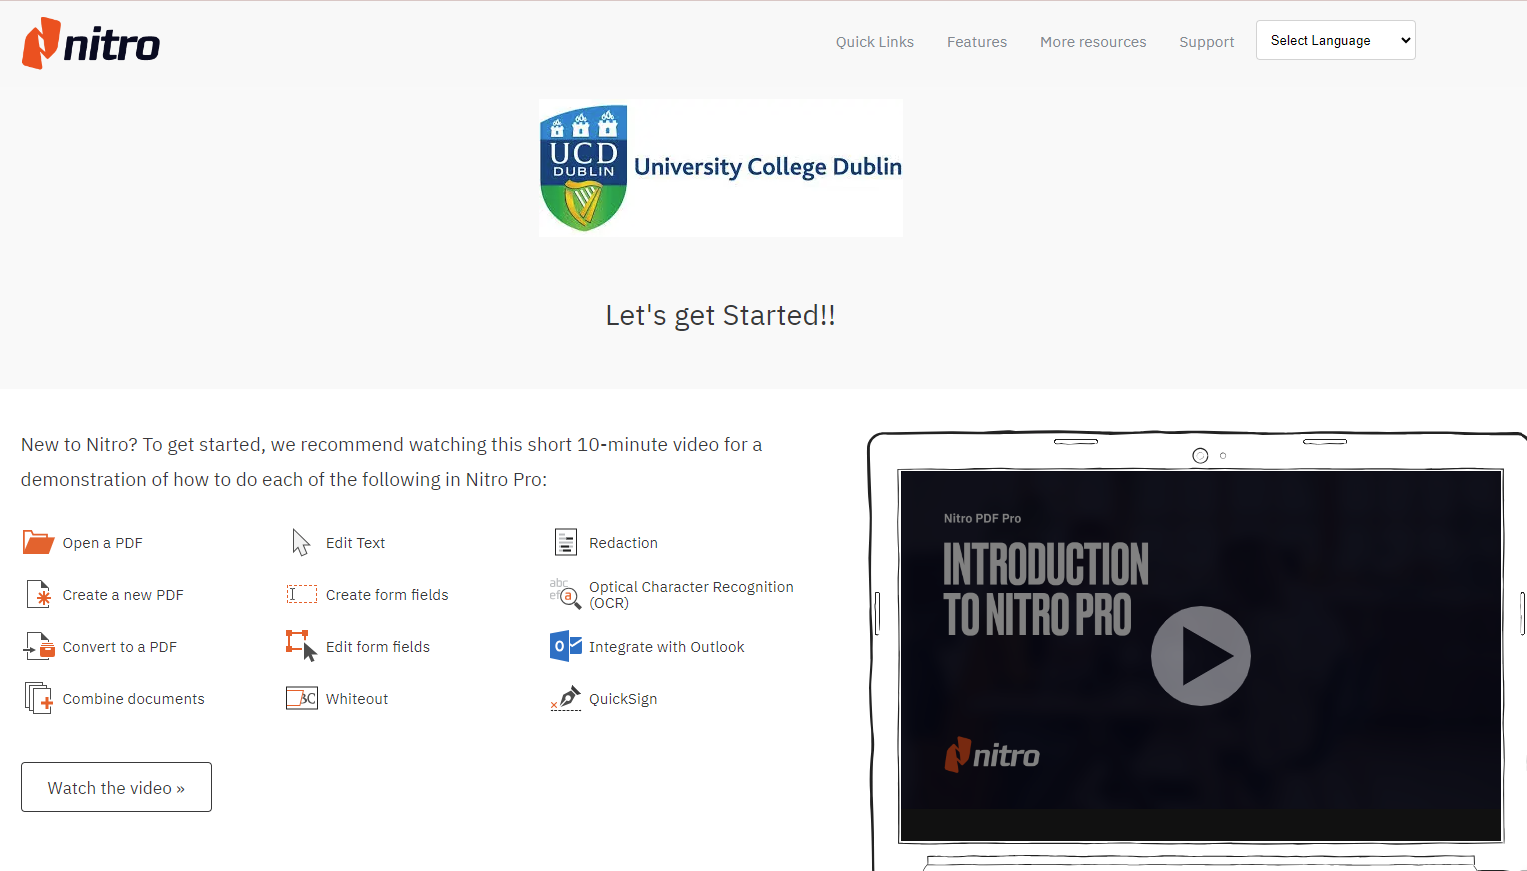 Screenshot of Nitro UCD microsite, showing the UCD logo with some help links and an embedded introductory video to Nitro PDF Pro